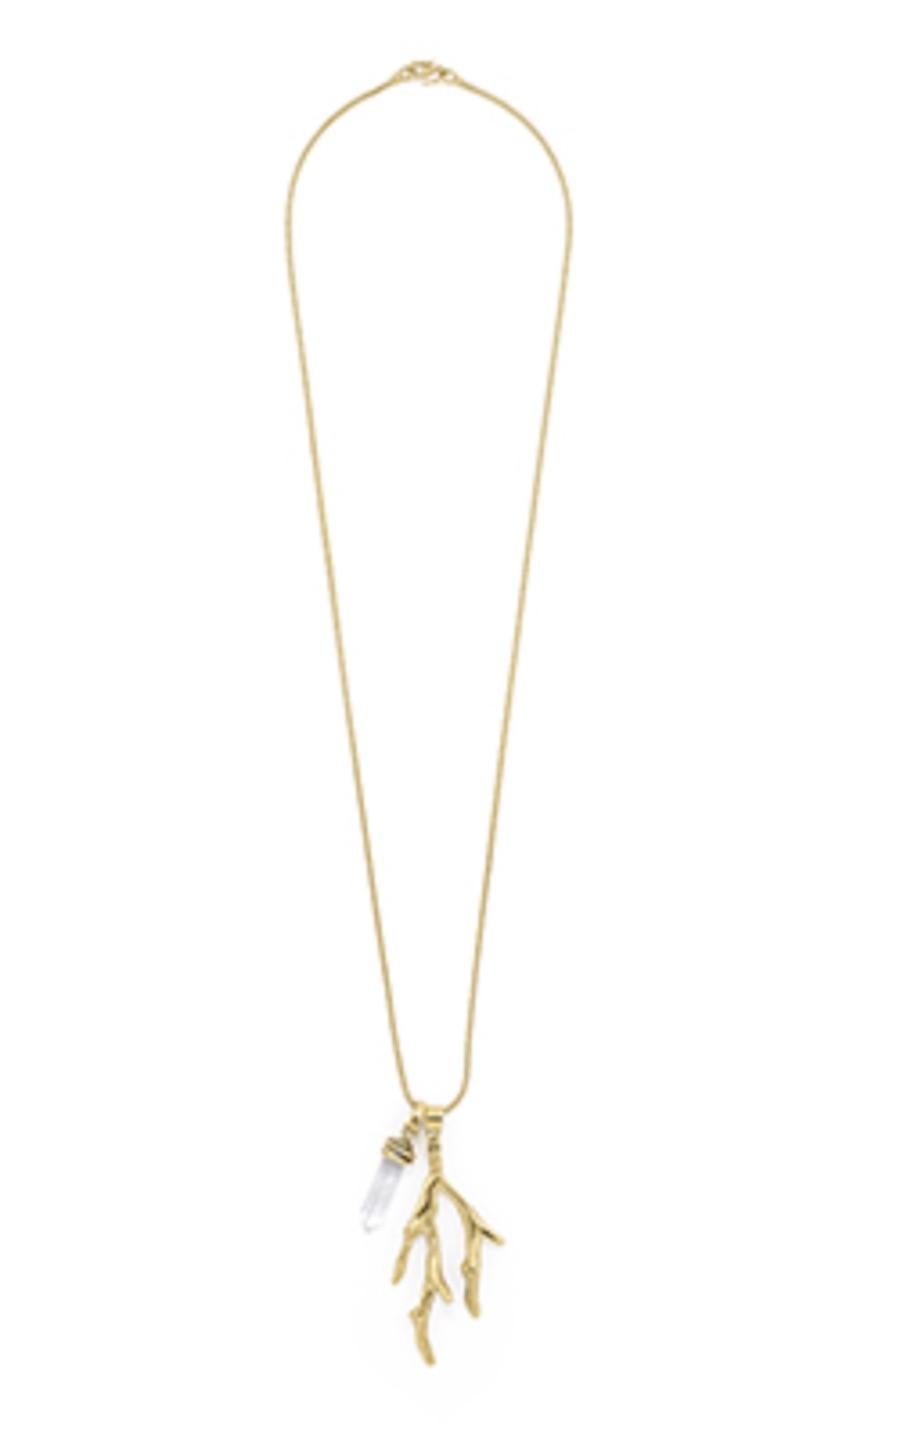 24 karat gold plated pendant necklace from Goossens Paris. Coral branch pendant and six-sided natural rock crystal pendant. 

Inspired by the heritage of Robert Goossens, this collection enhances raw crystal, coral and medallions.

Size of the rock